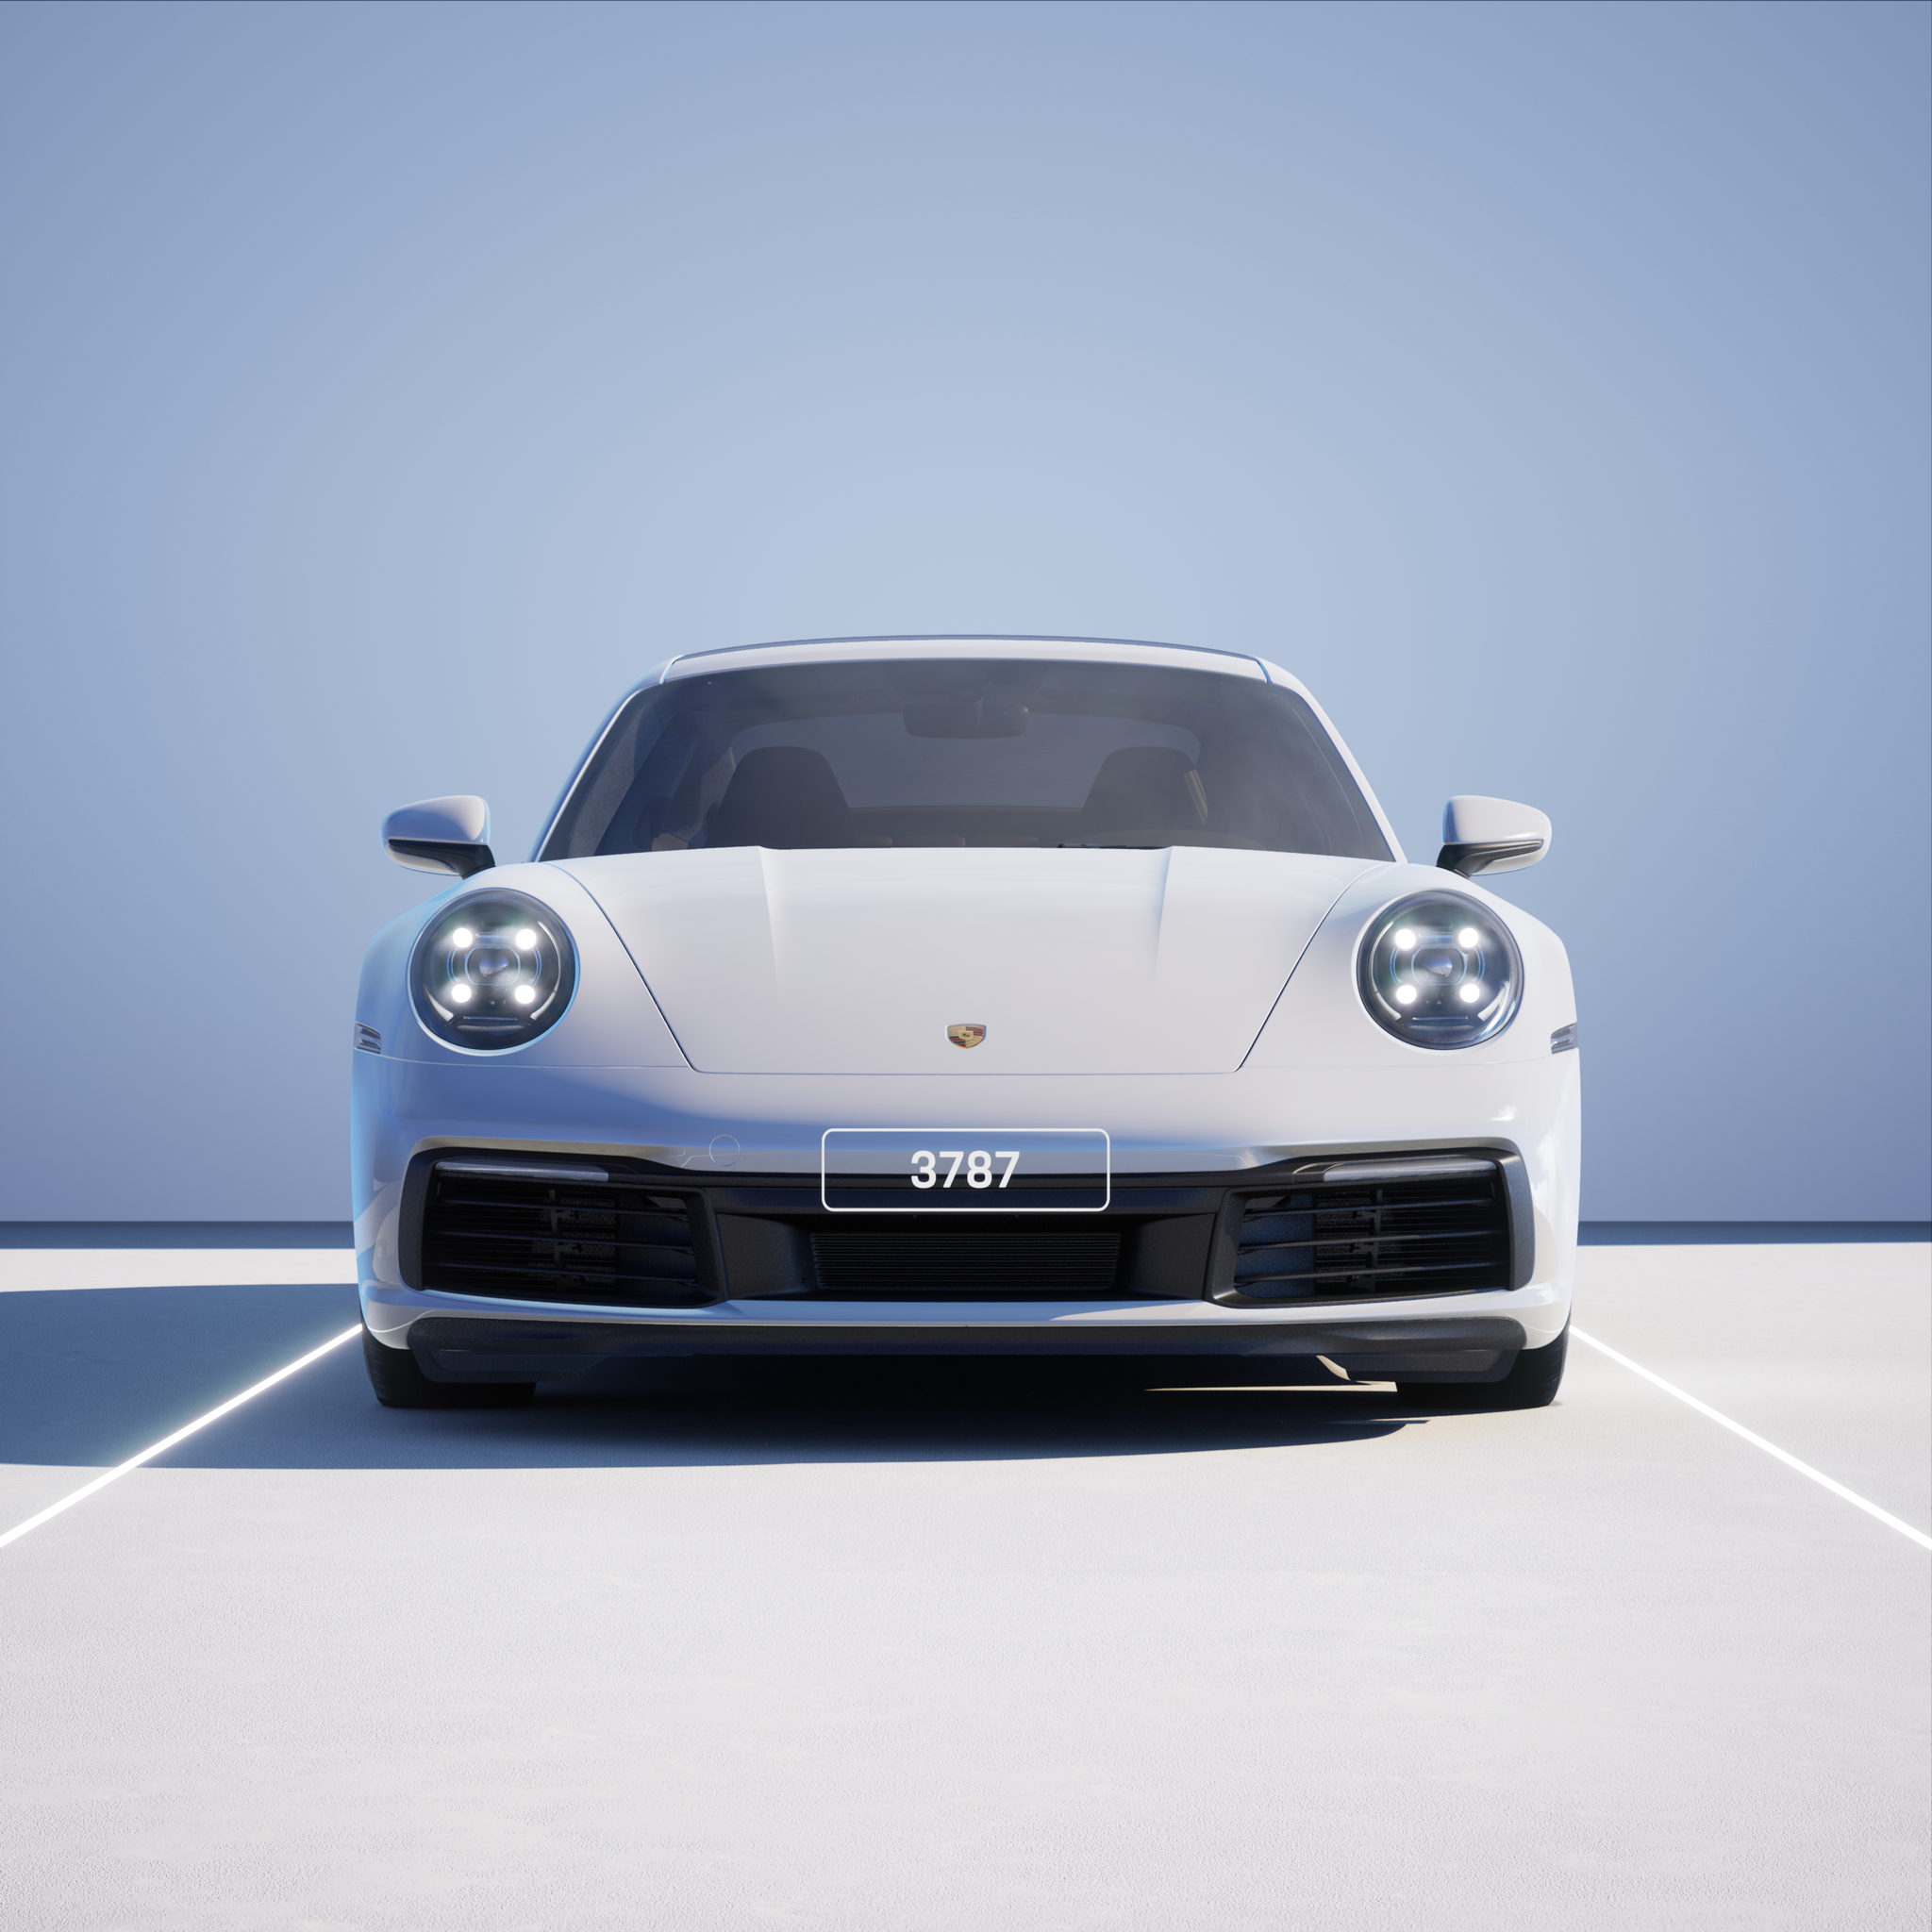 The PORSCHΞ 911 3787 image in phase